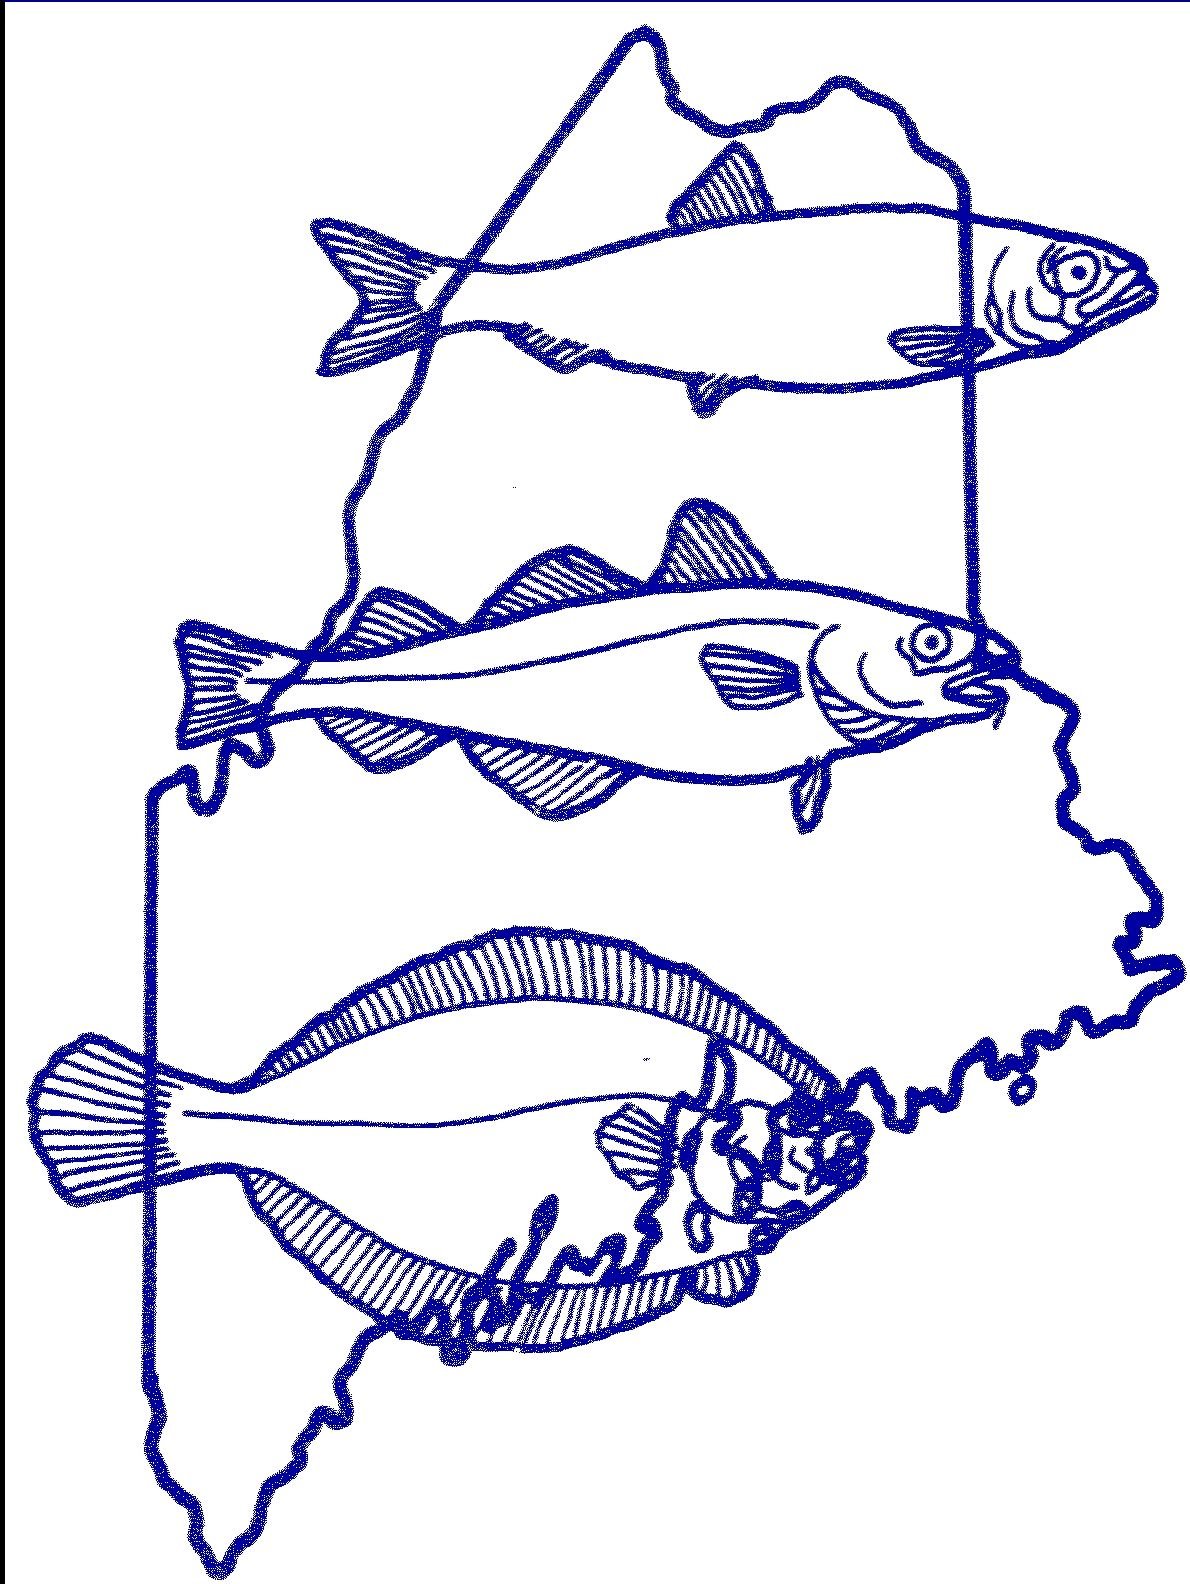 Fisheries ecology